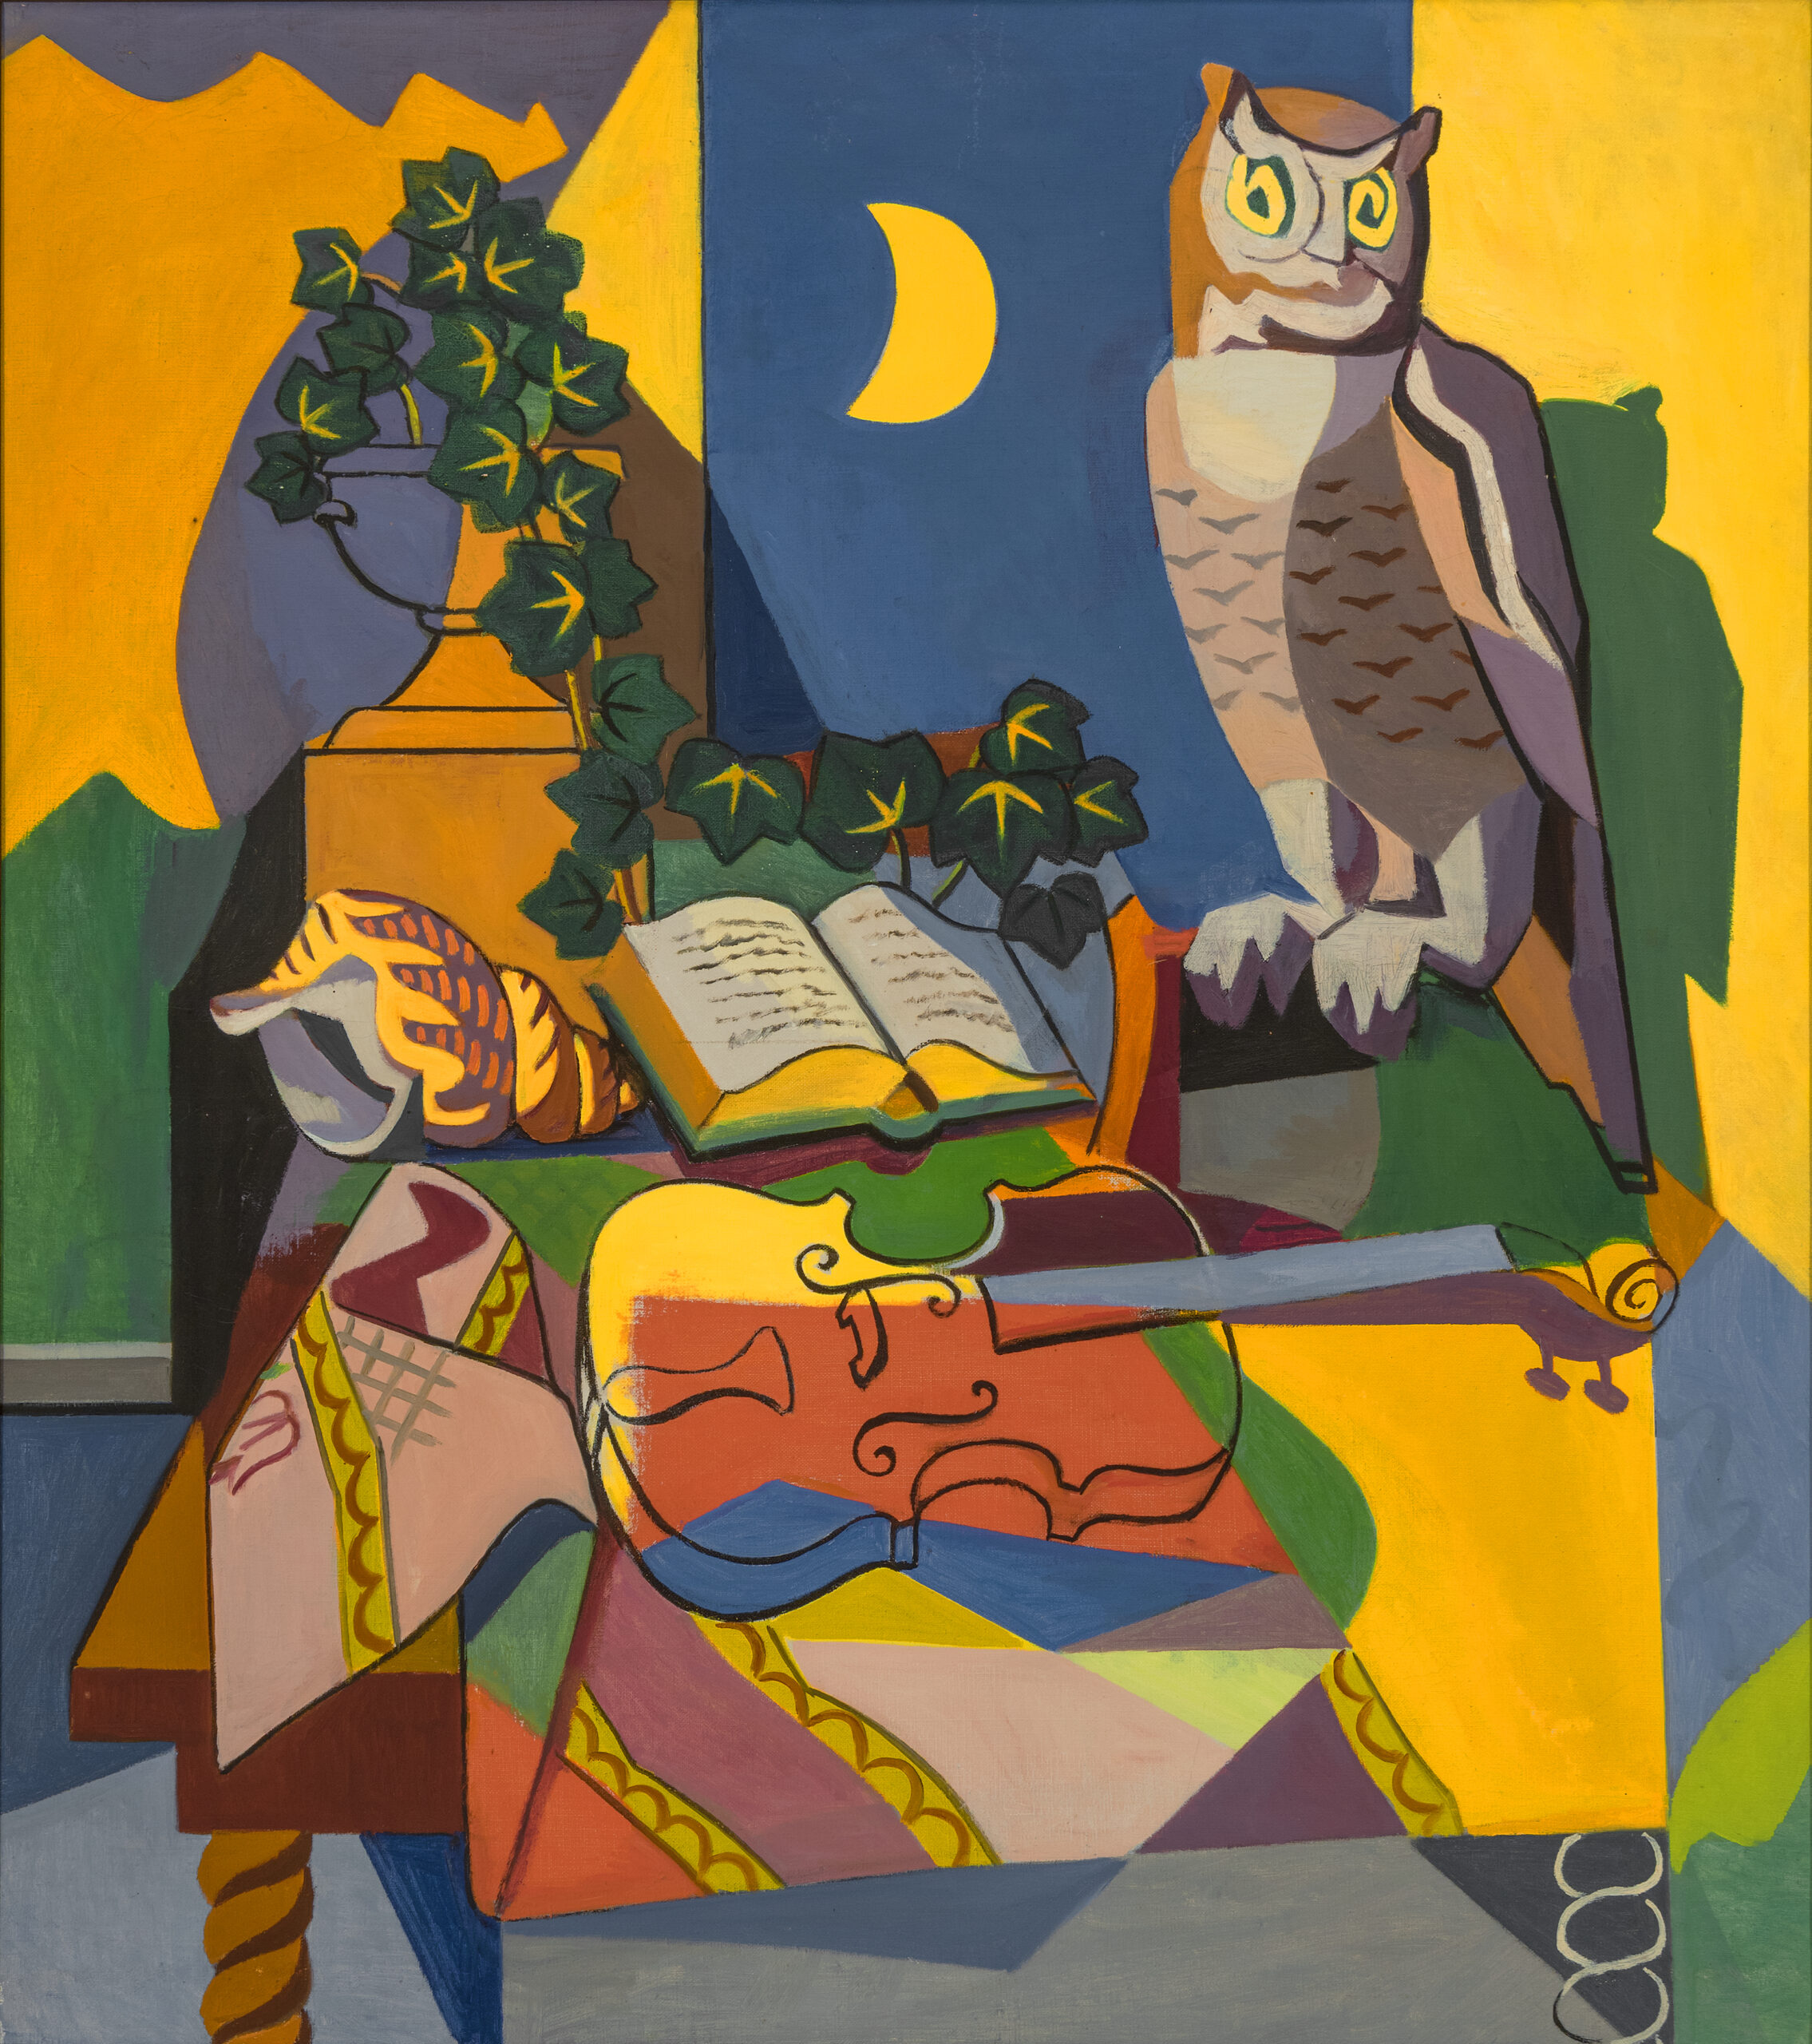 A still life painting featuring various objects including an owl, a violin, an open book, and a conch shell, on a table under a crescent moon.